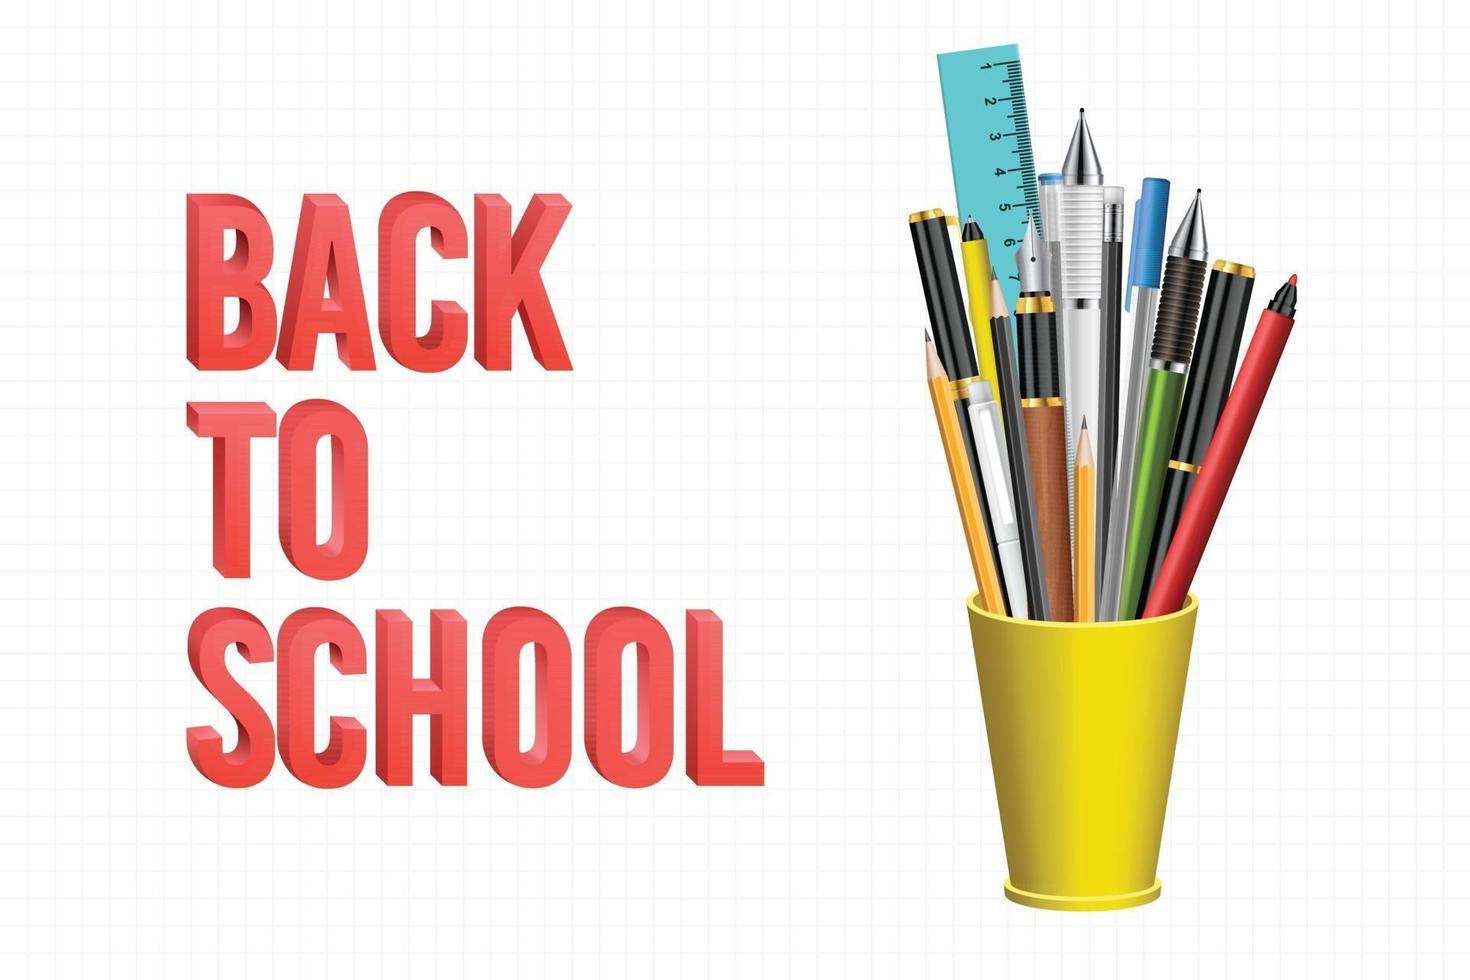 Back to school background with pens and pencils vector